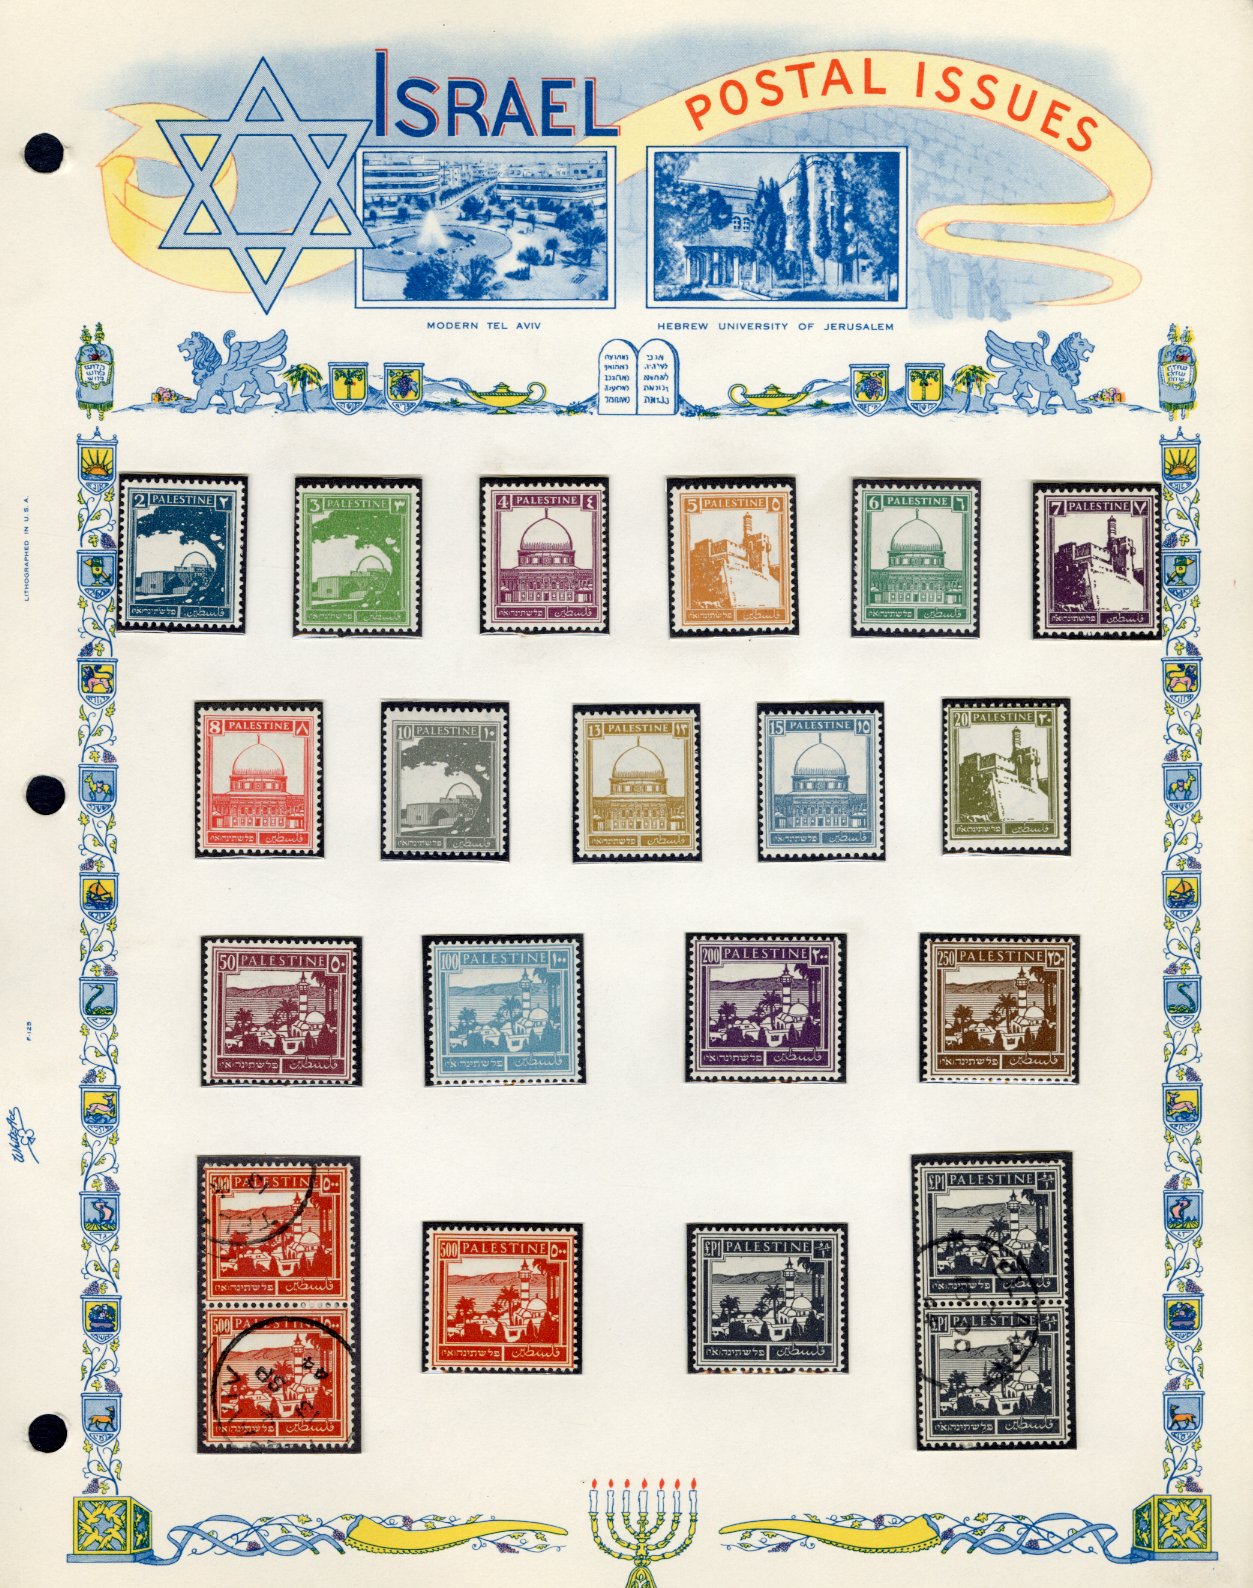 Lot 1493 - LARGE LOTS AND COLLECTIONS SAUDI ARABIA  -  Cherrystone Auctions U.S. & Worldwide Stamps & Postal History